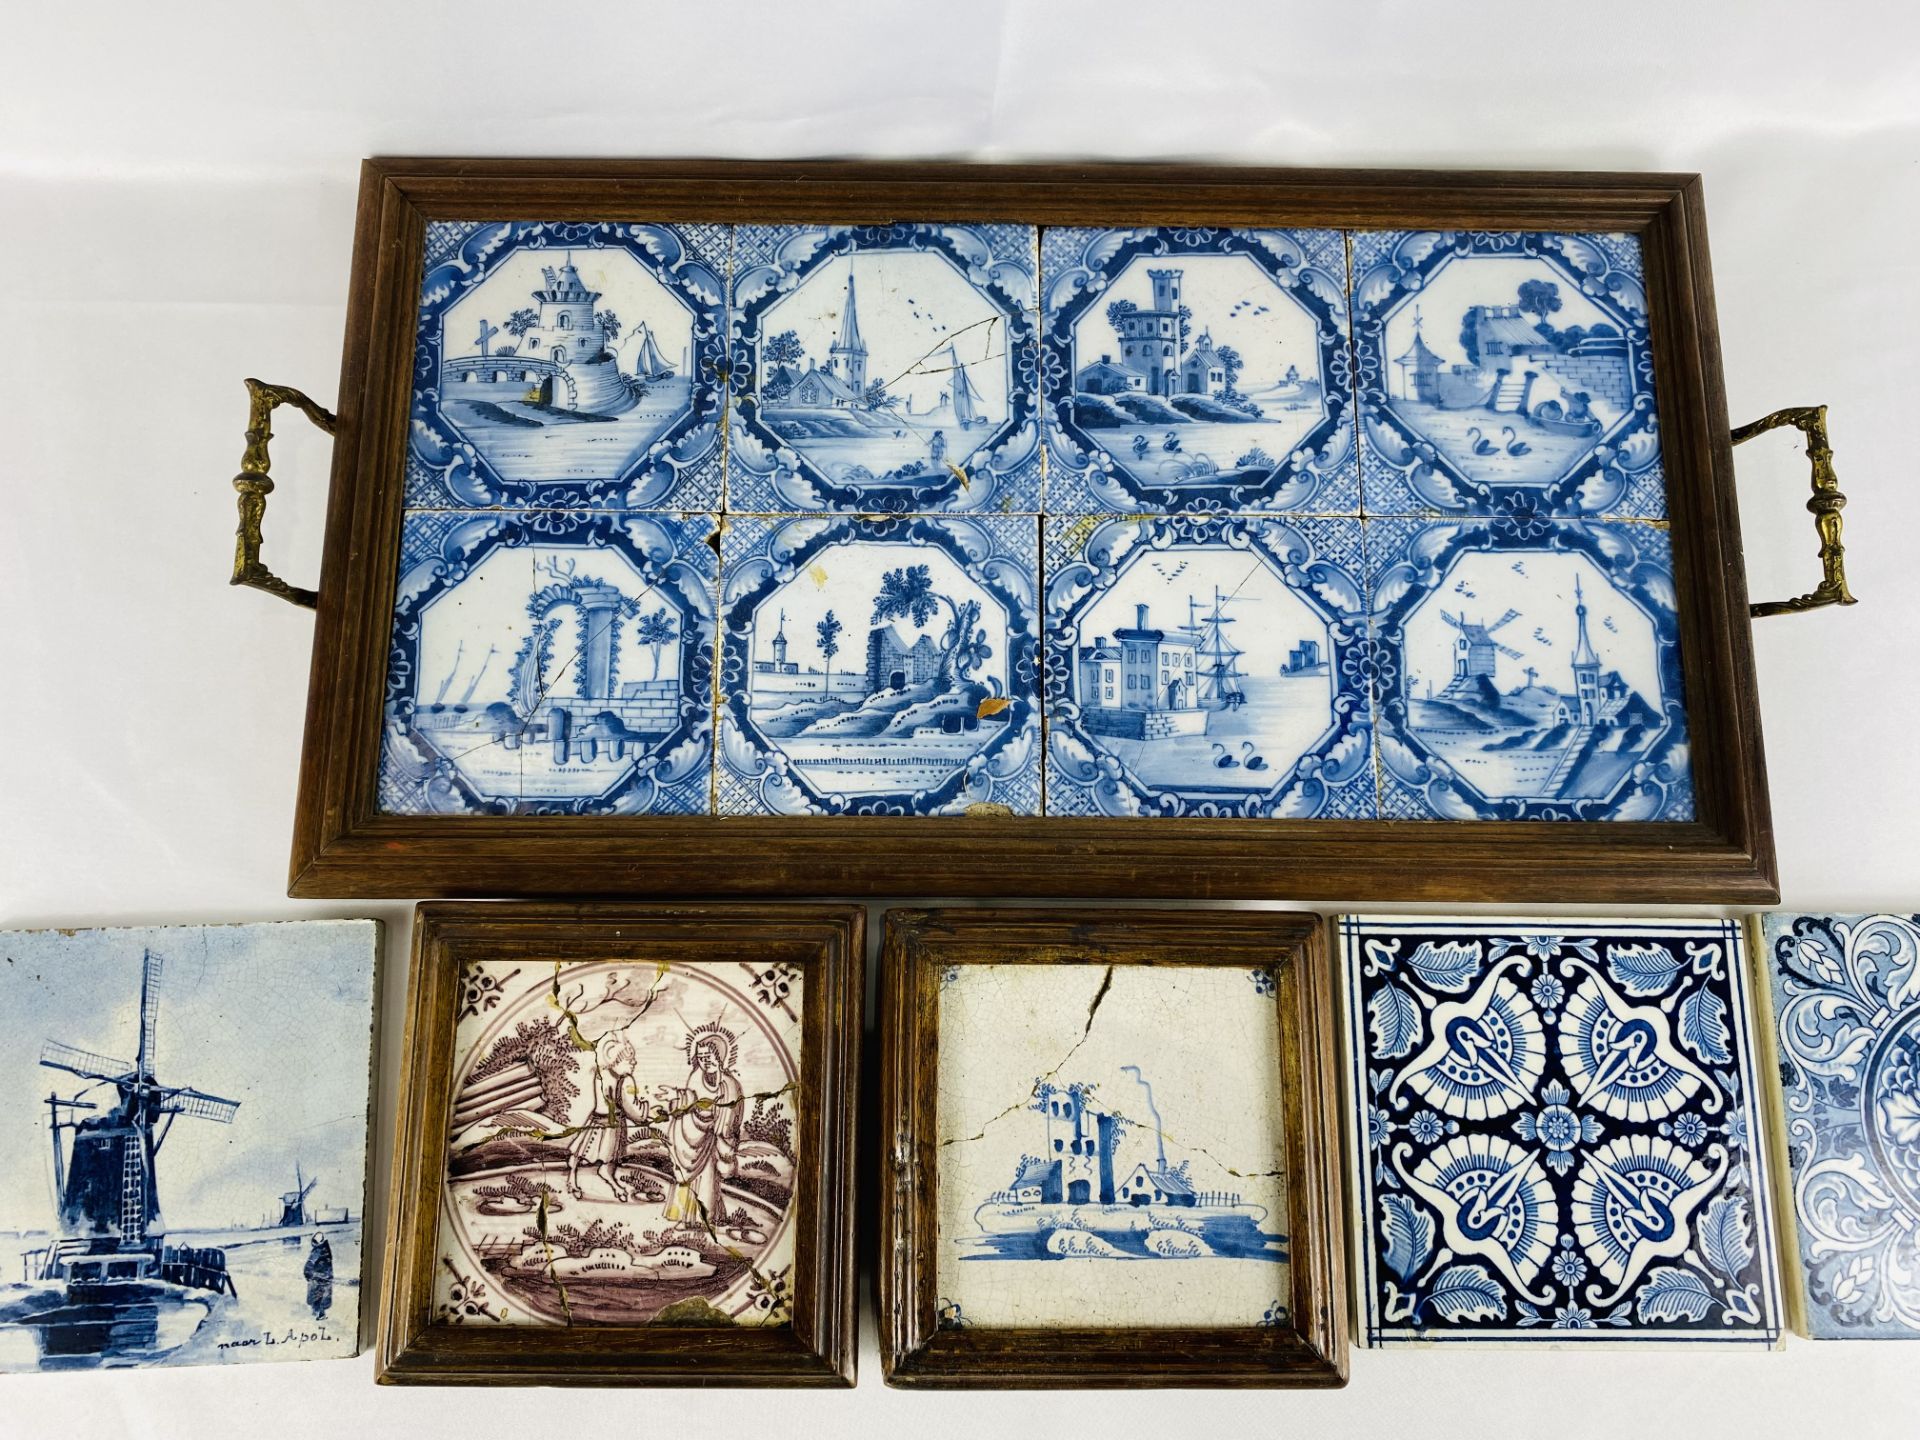 Delft tiles - Image 5 of 5